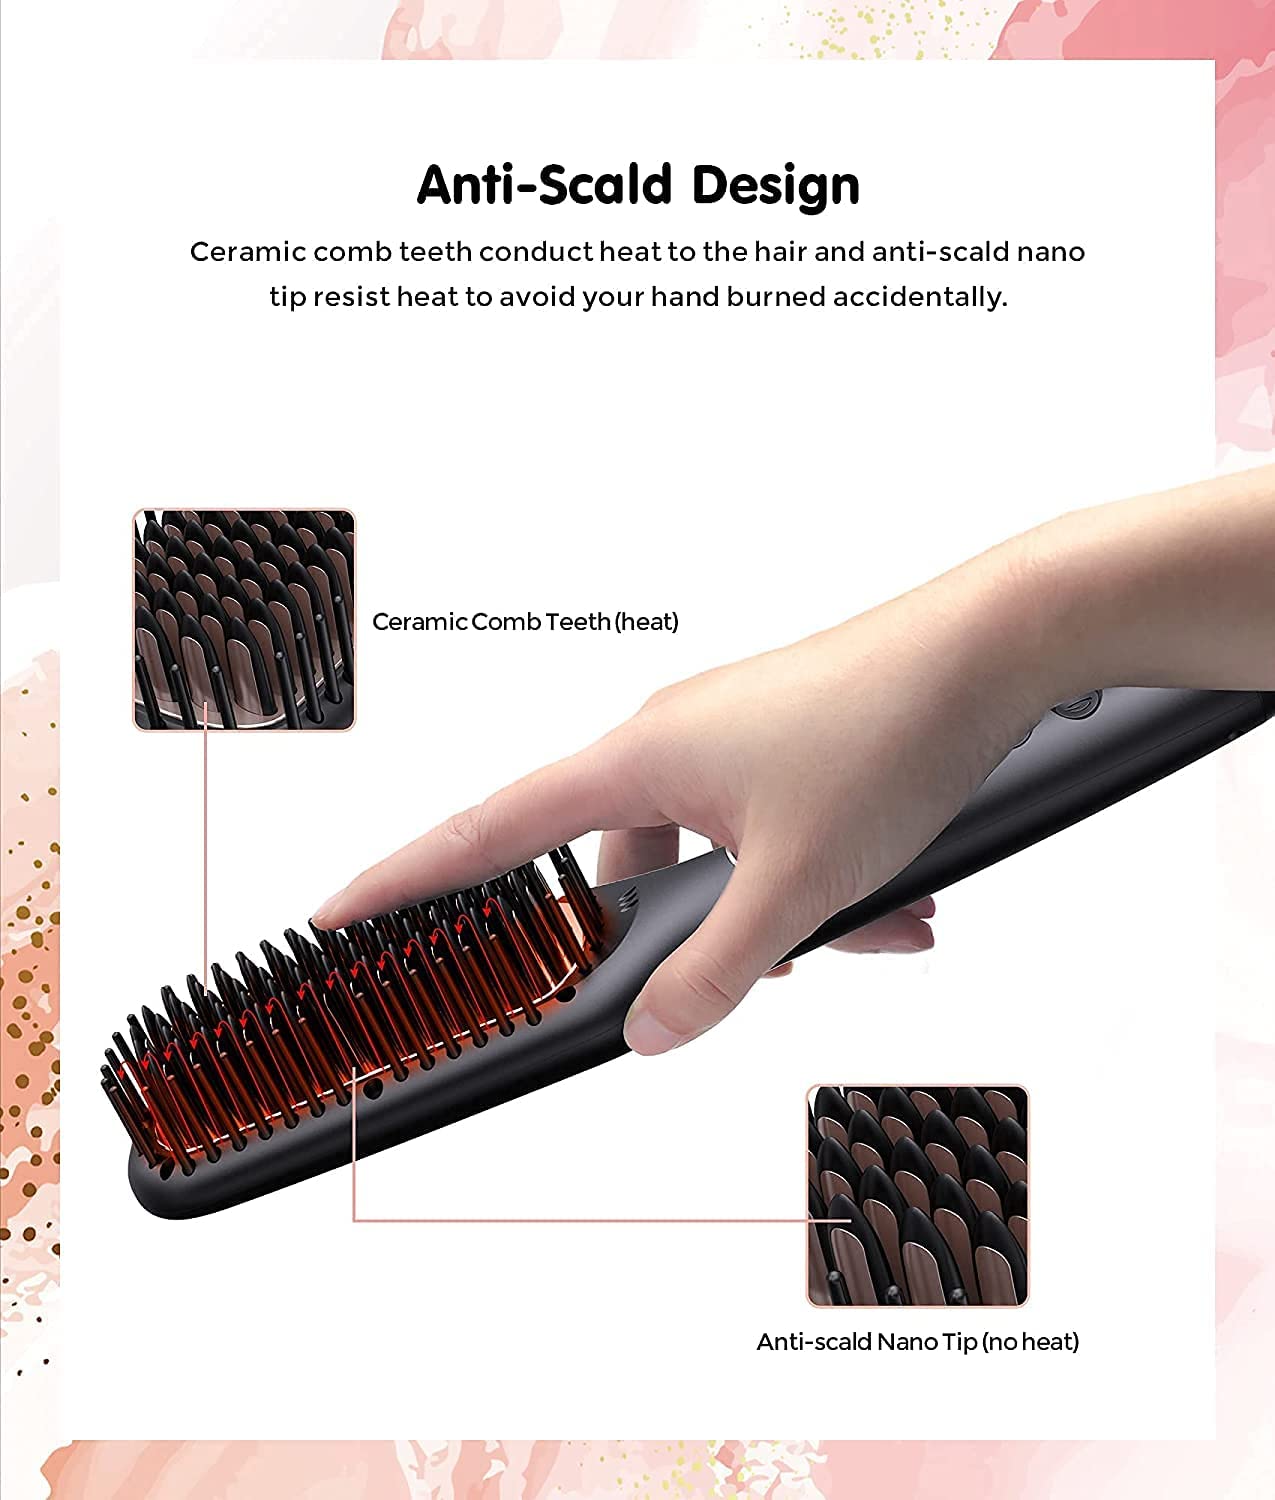 MEGAWISE Pro Ceramic Ionic Hair Straightener Brush for Home Salon | MCH Fast 20s Heating Tech with Auto-Off Safety | Anti-Scald with Universal Dual Voltage | Rotatable Power Cord